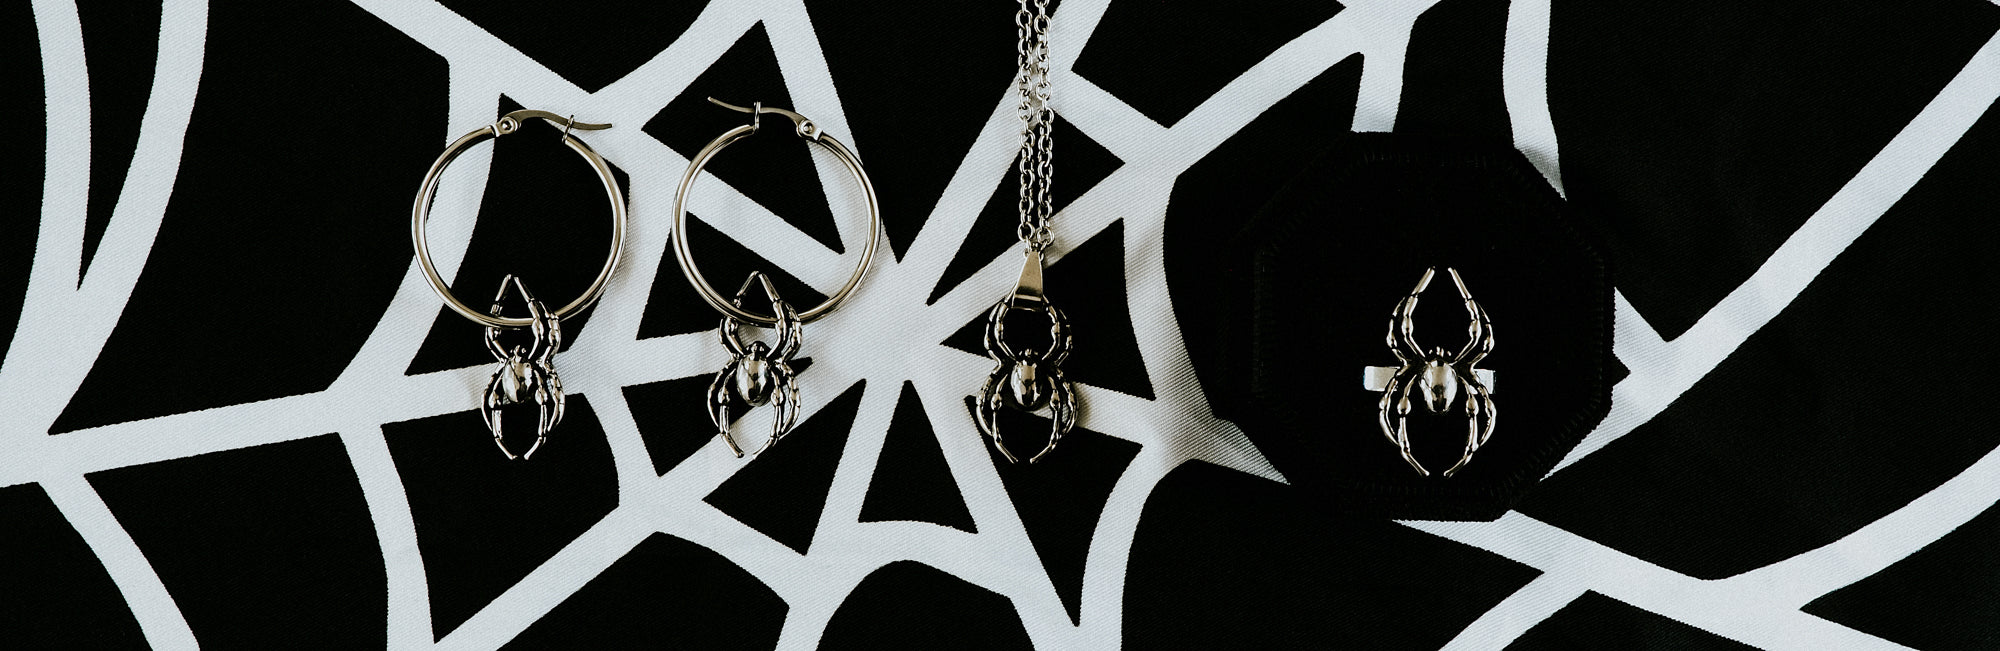 Orb Weaver | Spider Jewellery Collection